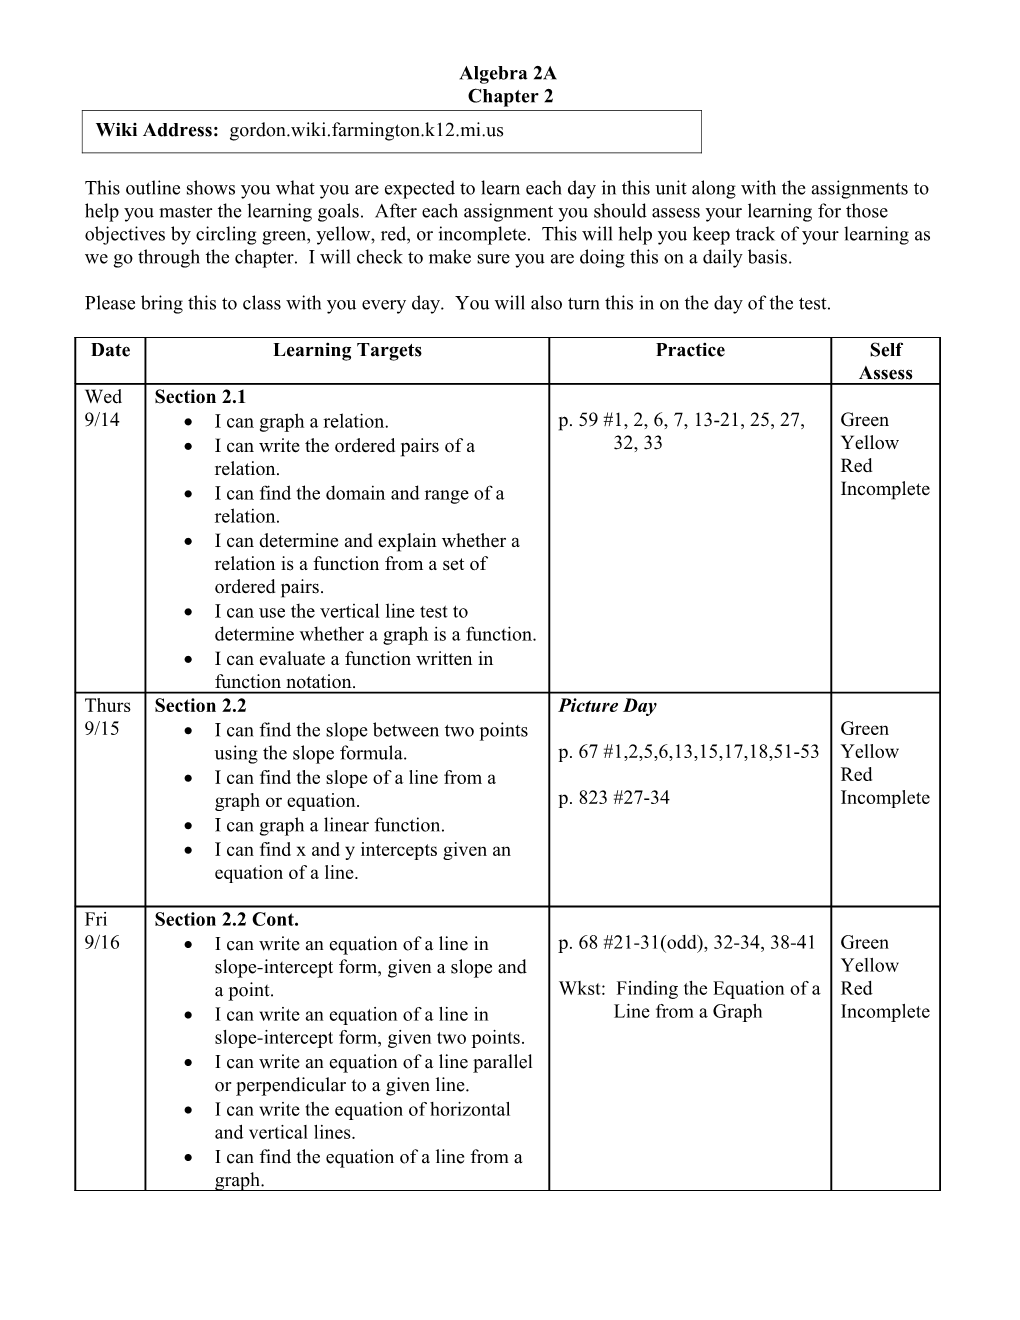 This Outline Shows You What You Are Expected to Learn Each Day in This Unit Along With